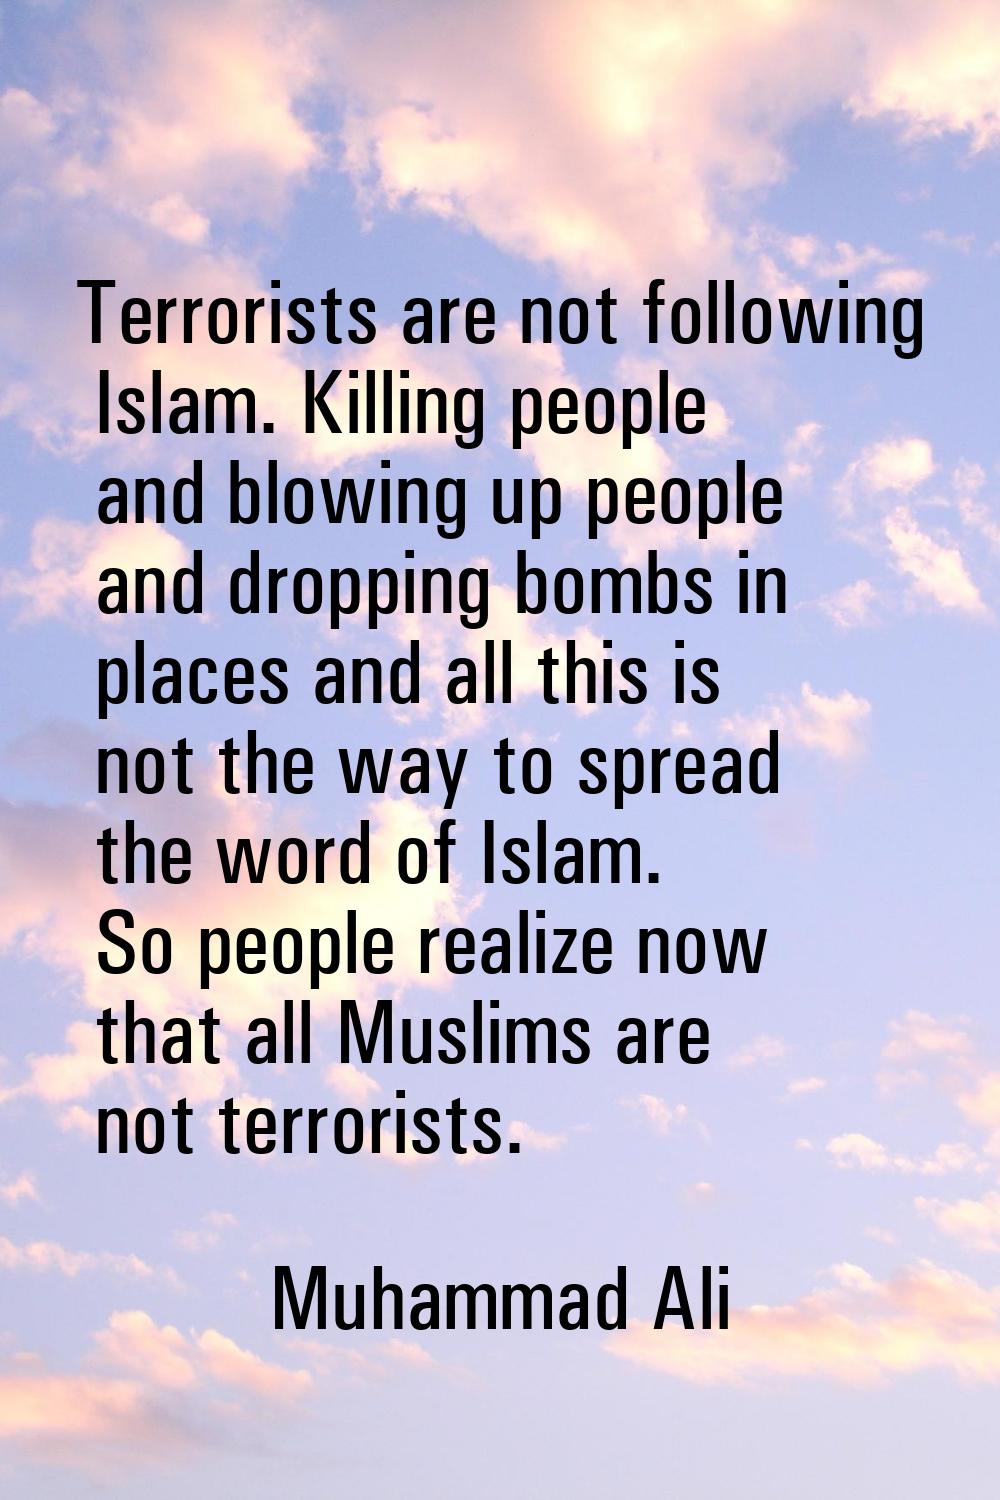 Terrorists are not following Islam. Killing people and blowing up people and dropping bombs in plac